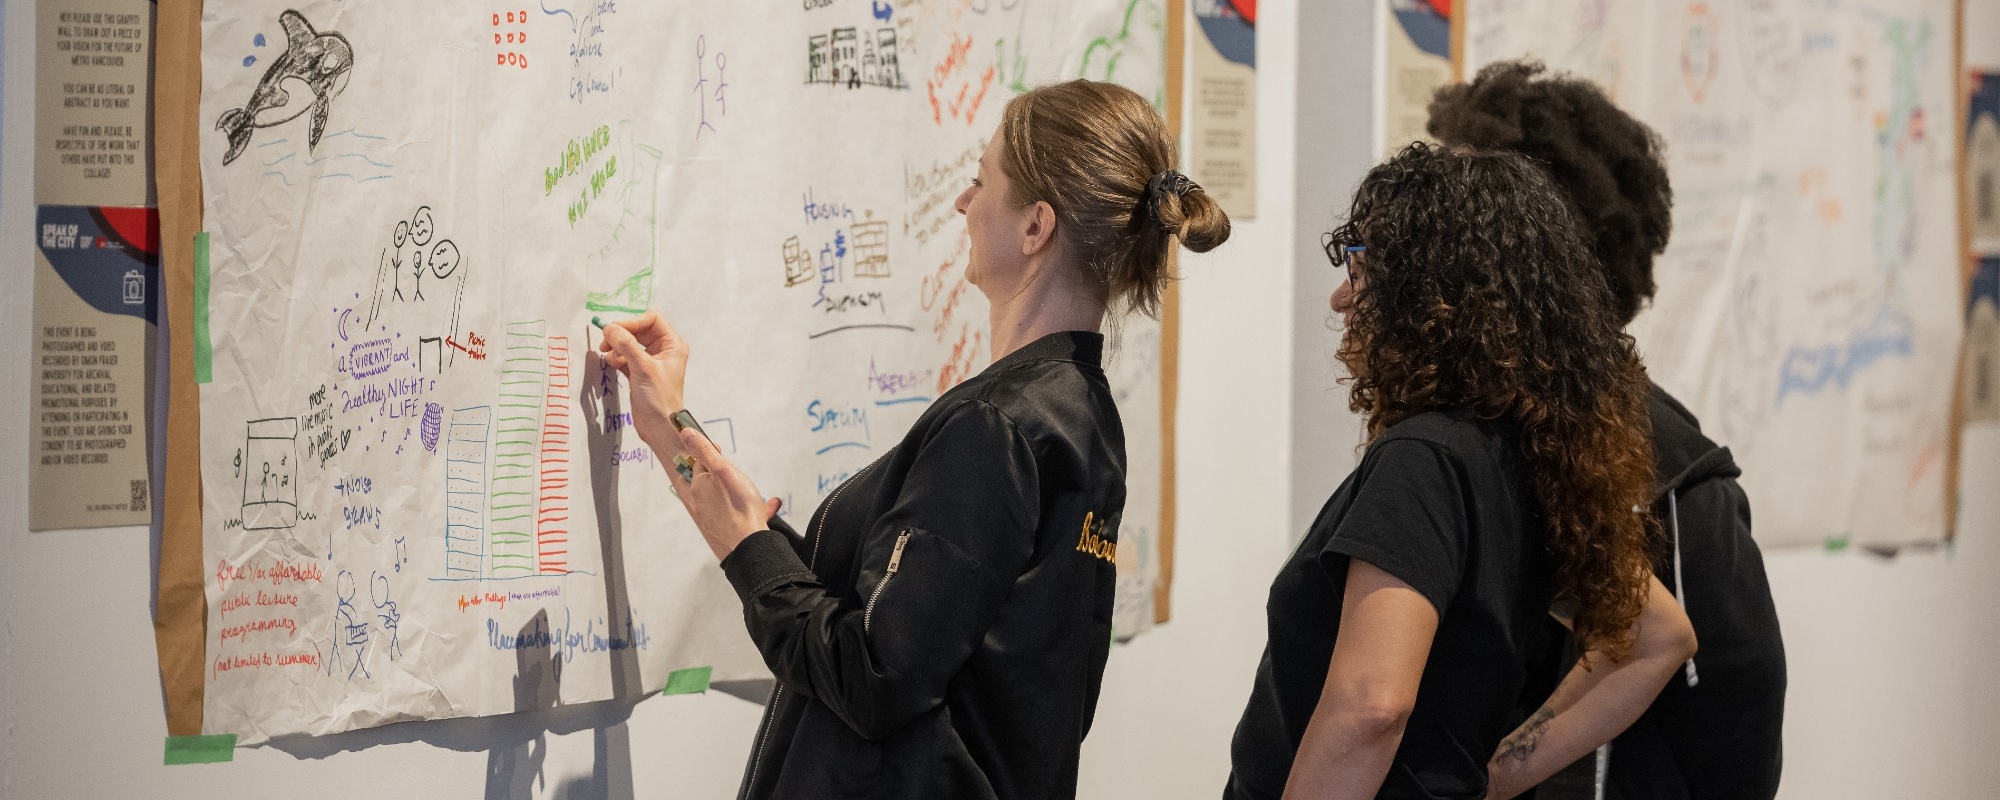 Two participants in a Hey Neighbour Collective dialogue watch another participant writing their thoughts on presentation paper on the wall. The paper is filled with thoughts and drawings from other participants. 